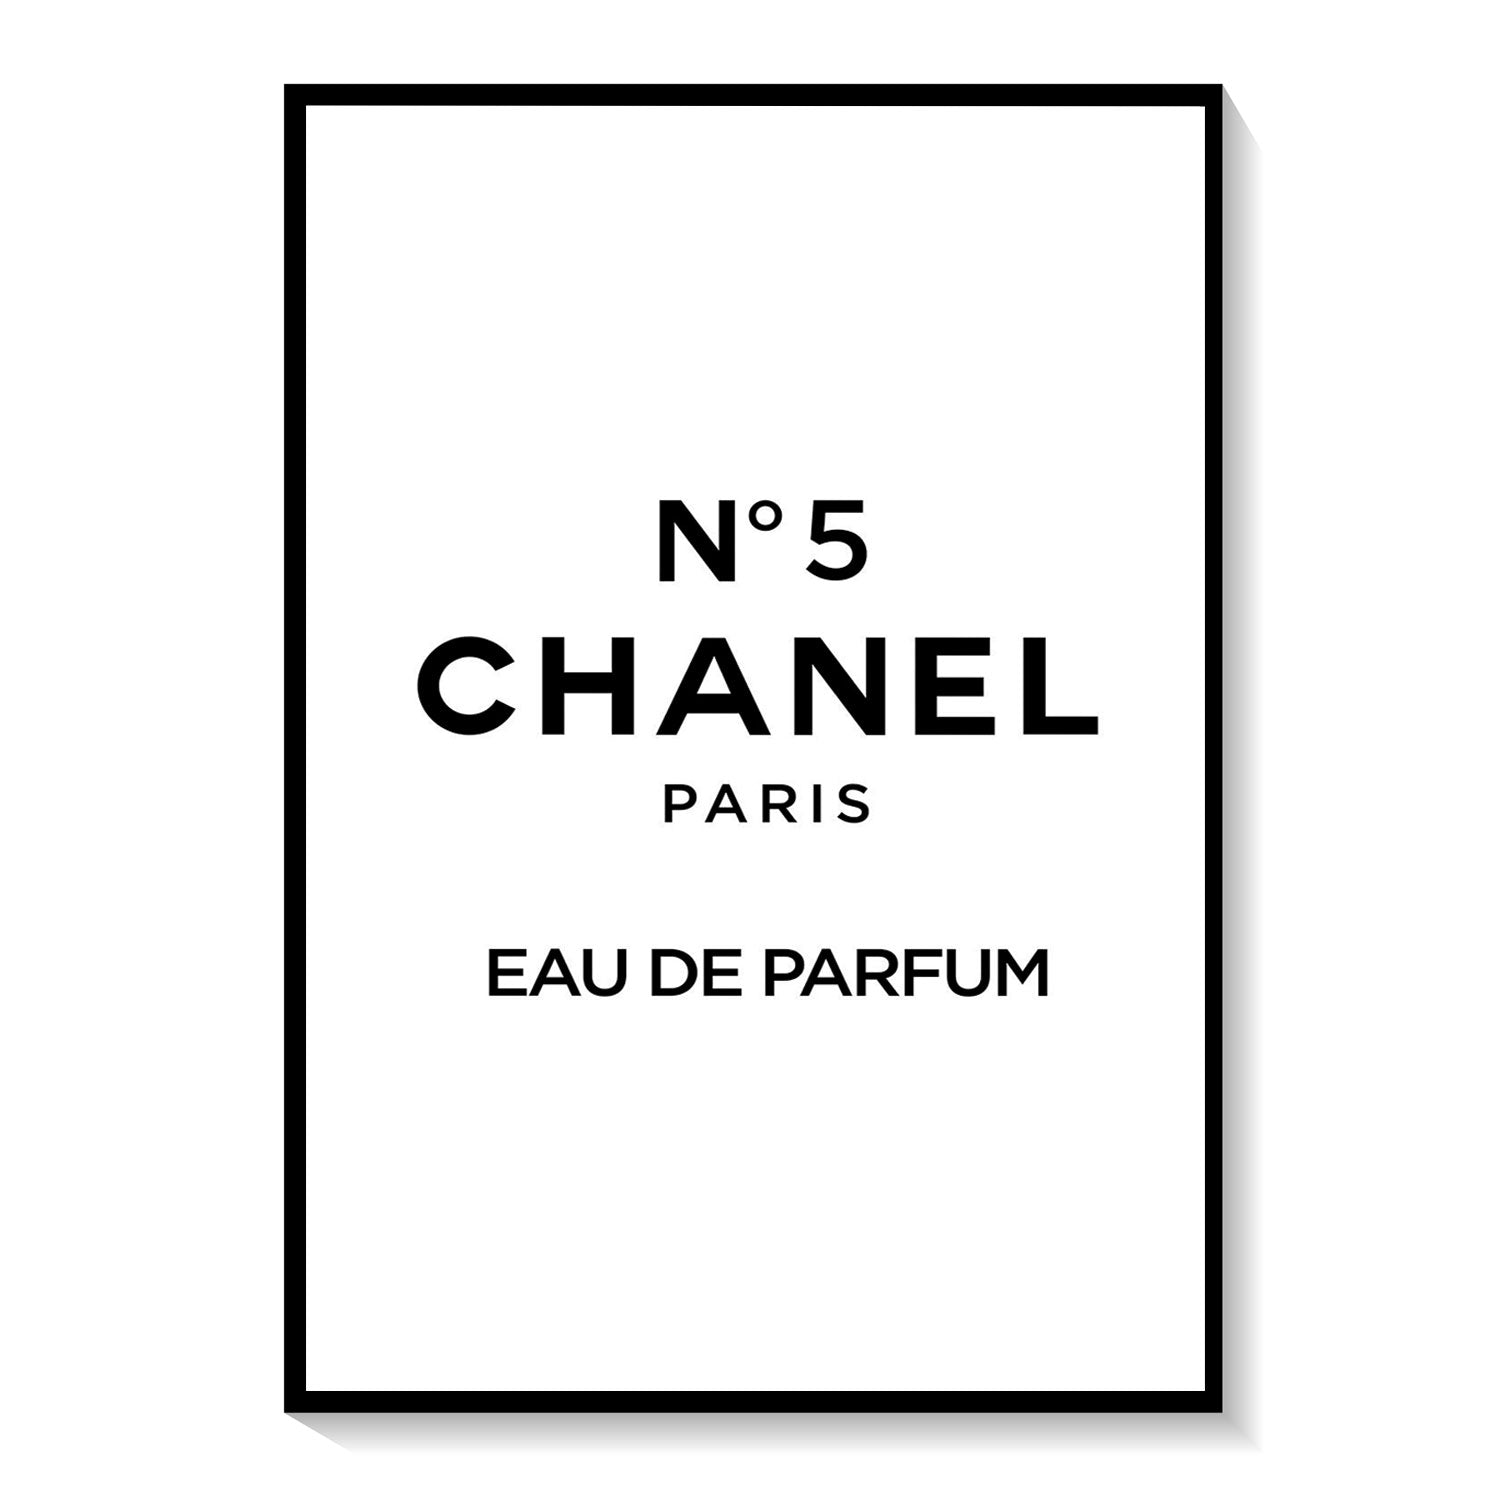 Chanel Perfume Poster: Buy Premium Framed Fashion Posters Online ...